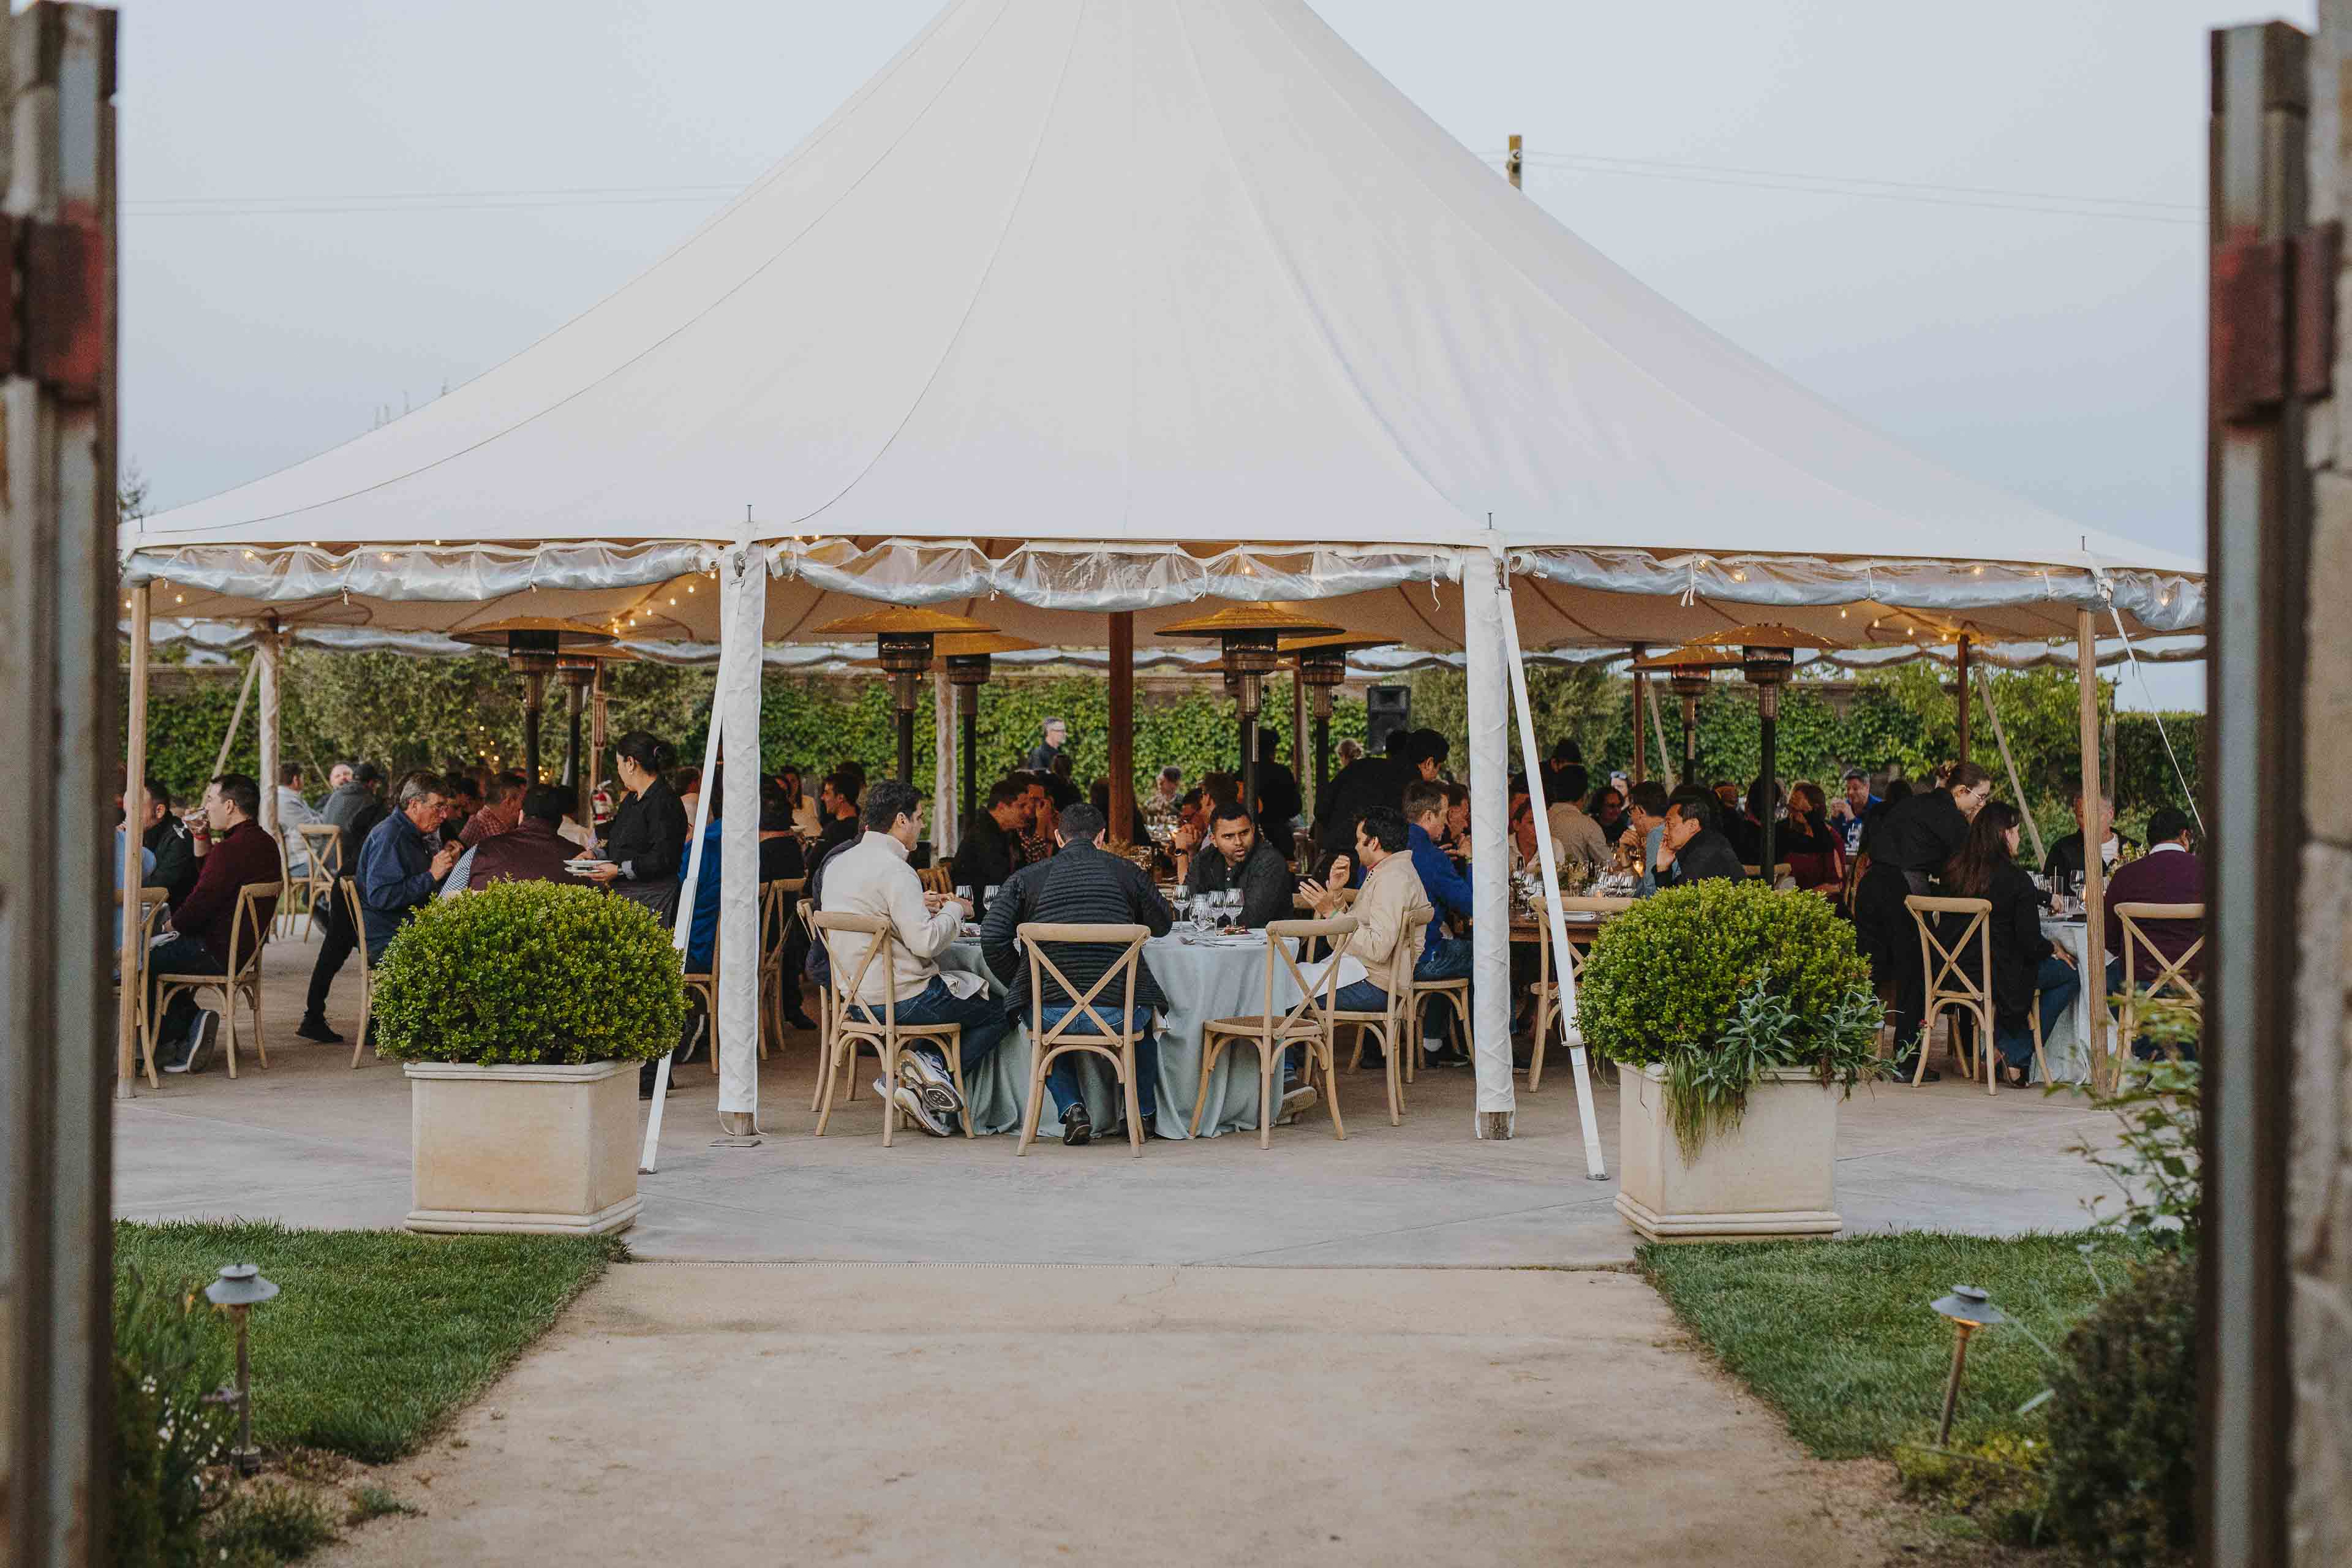 People Sitting At Tables Under A Large White Tent